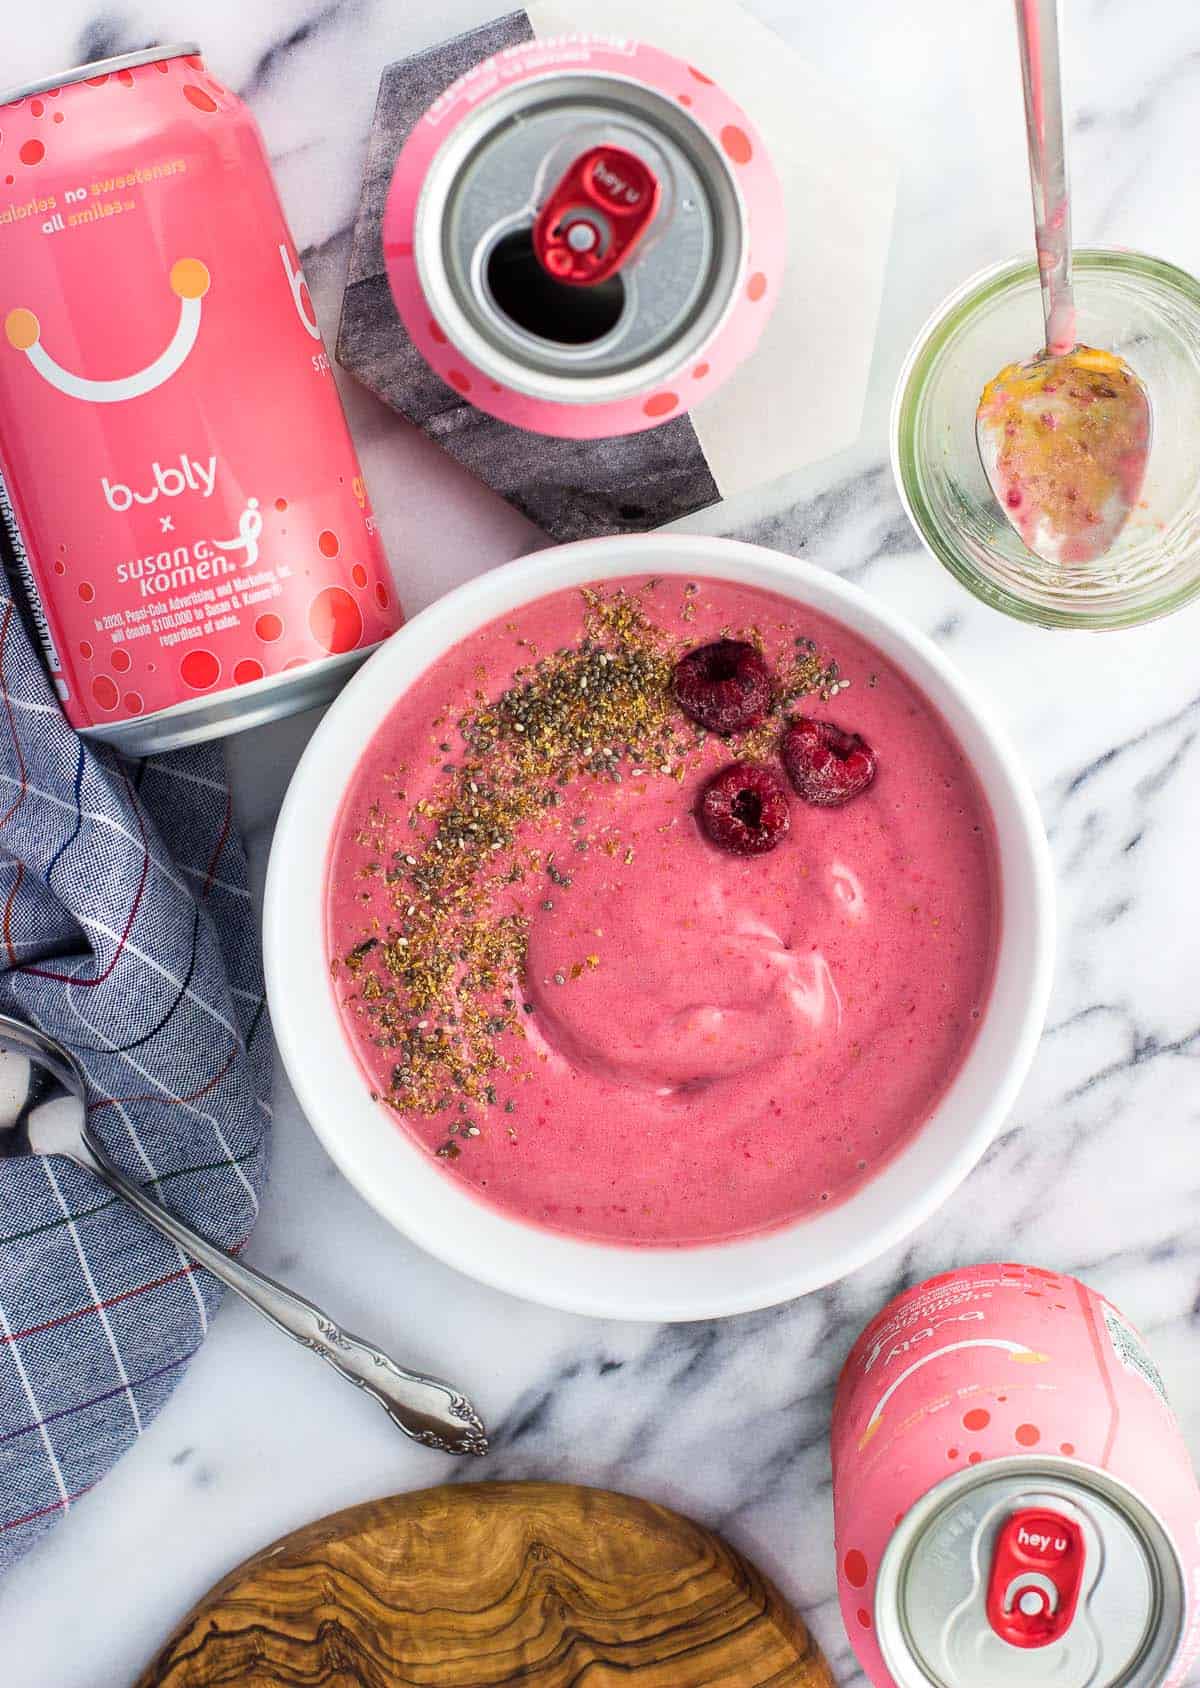 A smoothie bowl next to cans of bubly water and spoons.